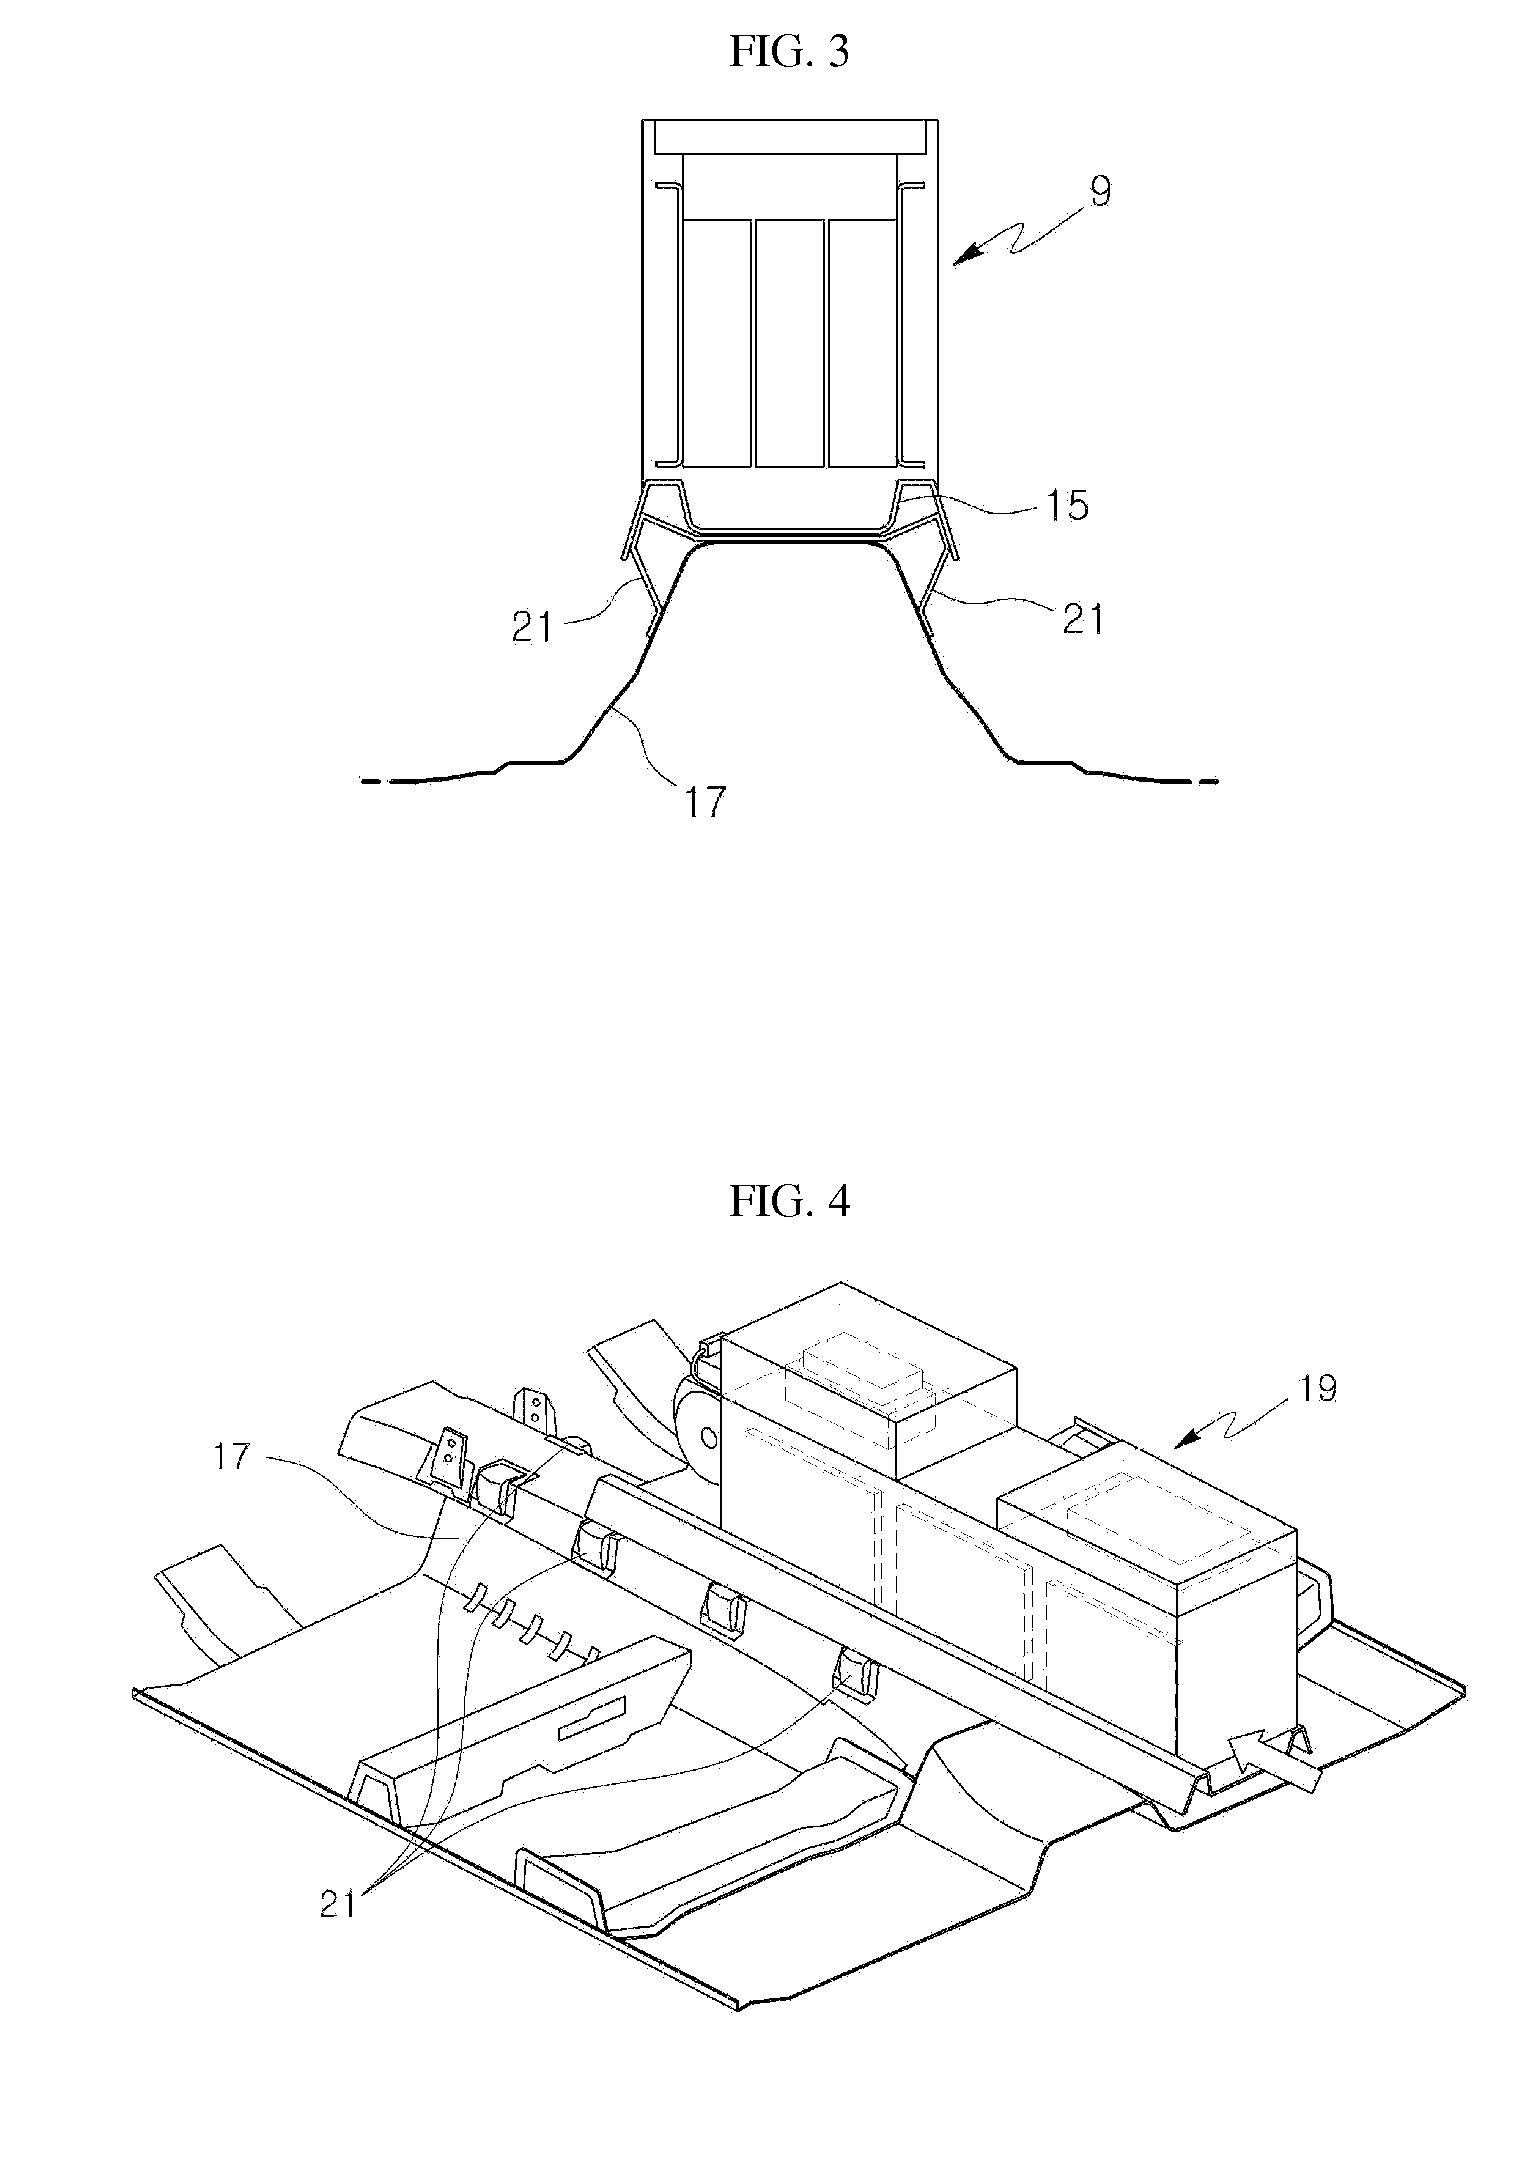 Battery pack mounting structure of vehicle